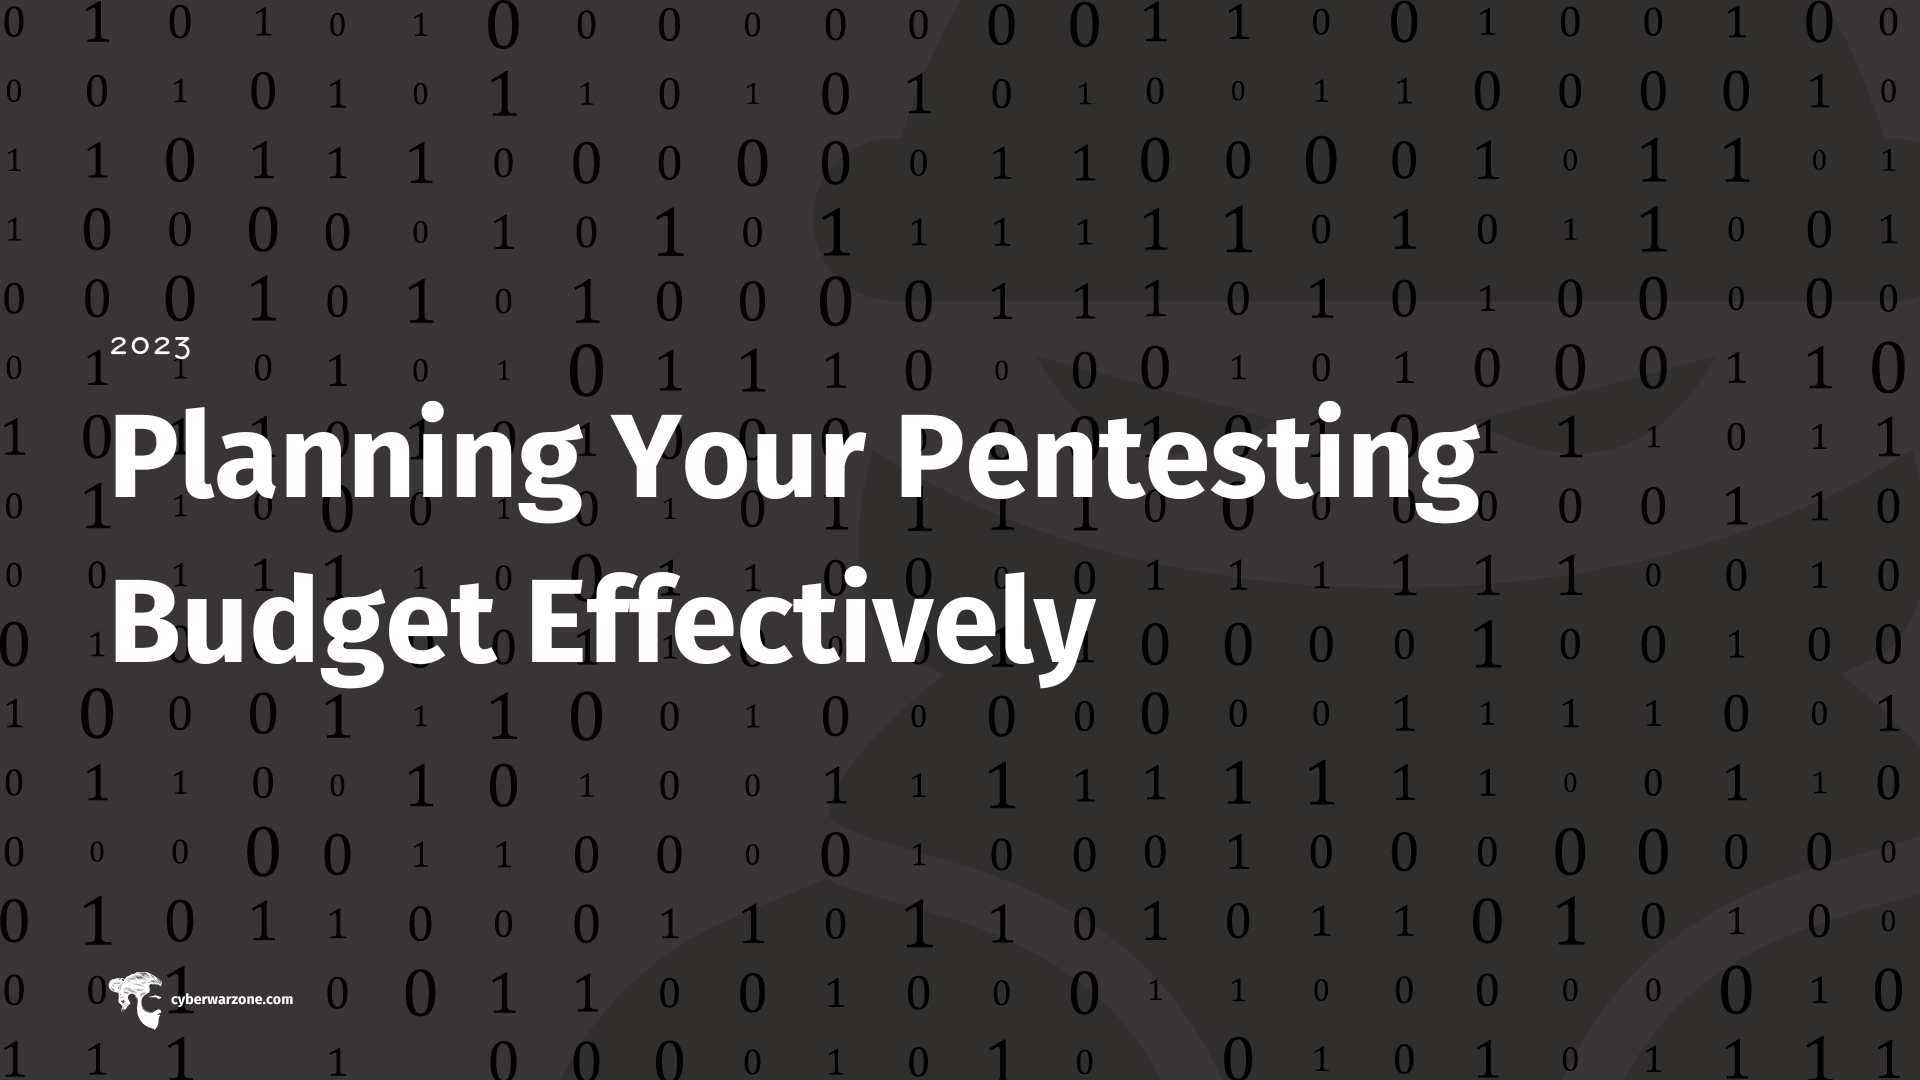 Planning Your Pentesting Budget Effectively